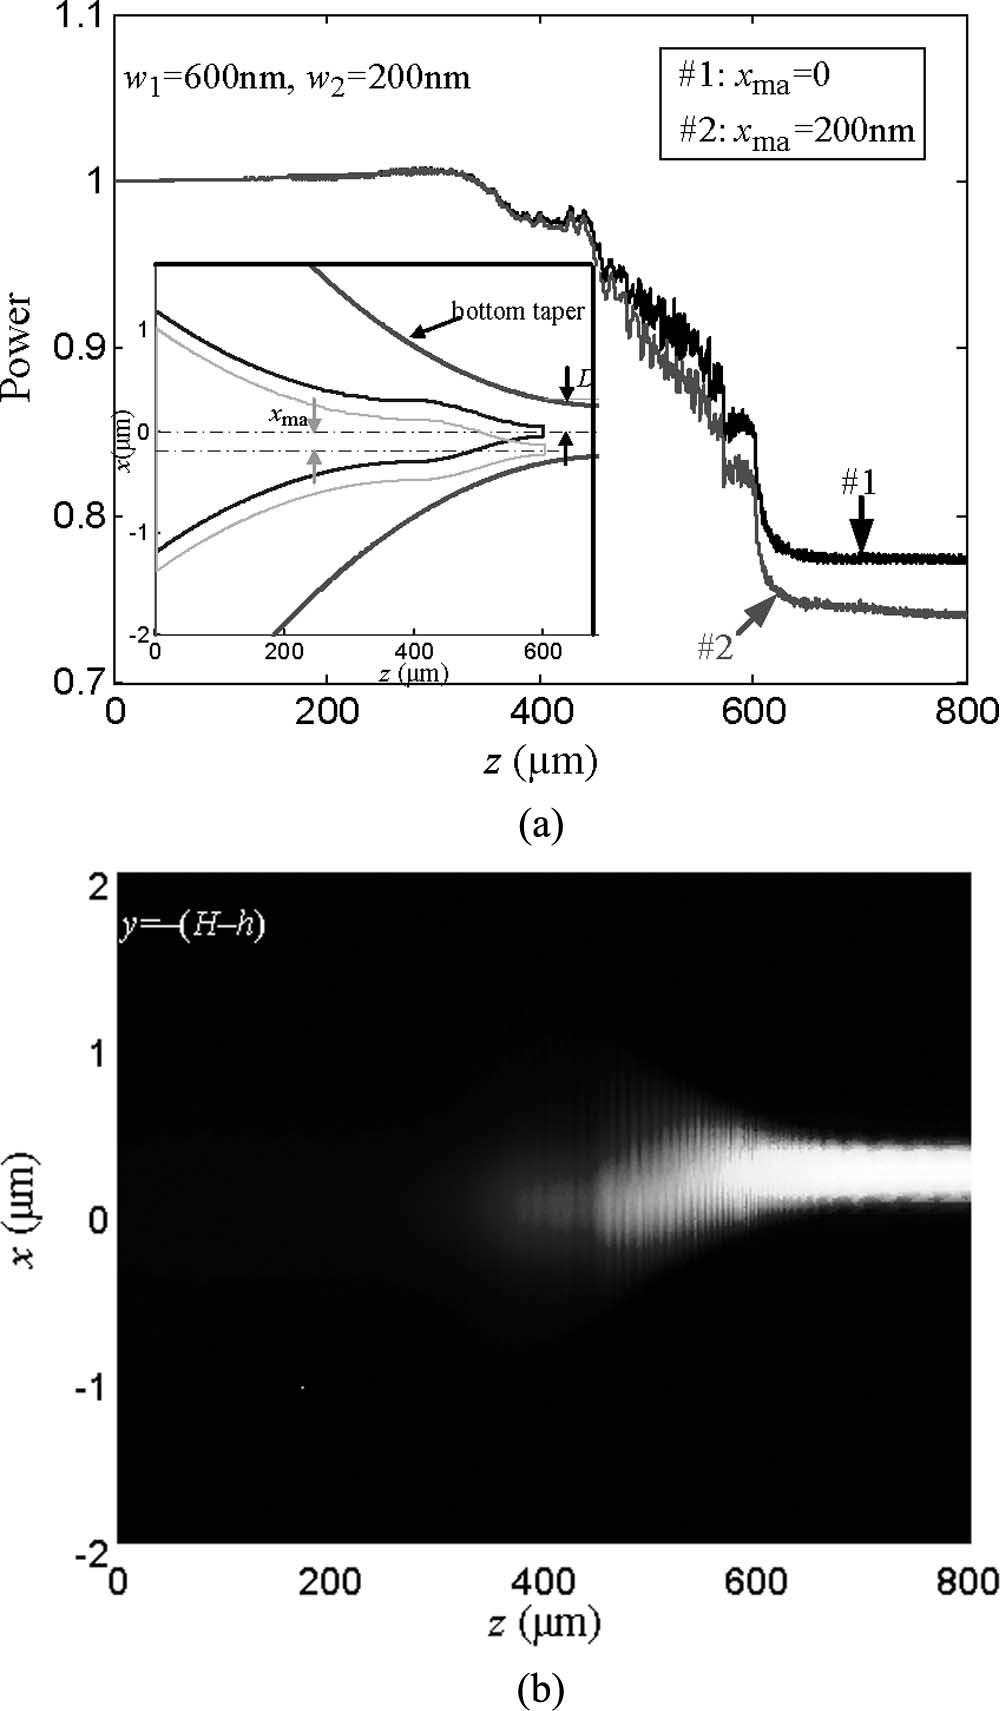 2432 JOURNAL OF LIGHTWAVE TECHNOLOGY, VOL. 24, NO. 6, JUNE 2006 Fig. 5. Power propagation in the bilevel taper for different wavelengths. Fig. 7. Power propagation when h co = 350, 500, and 800 nm.